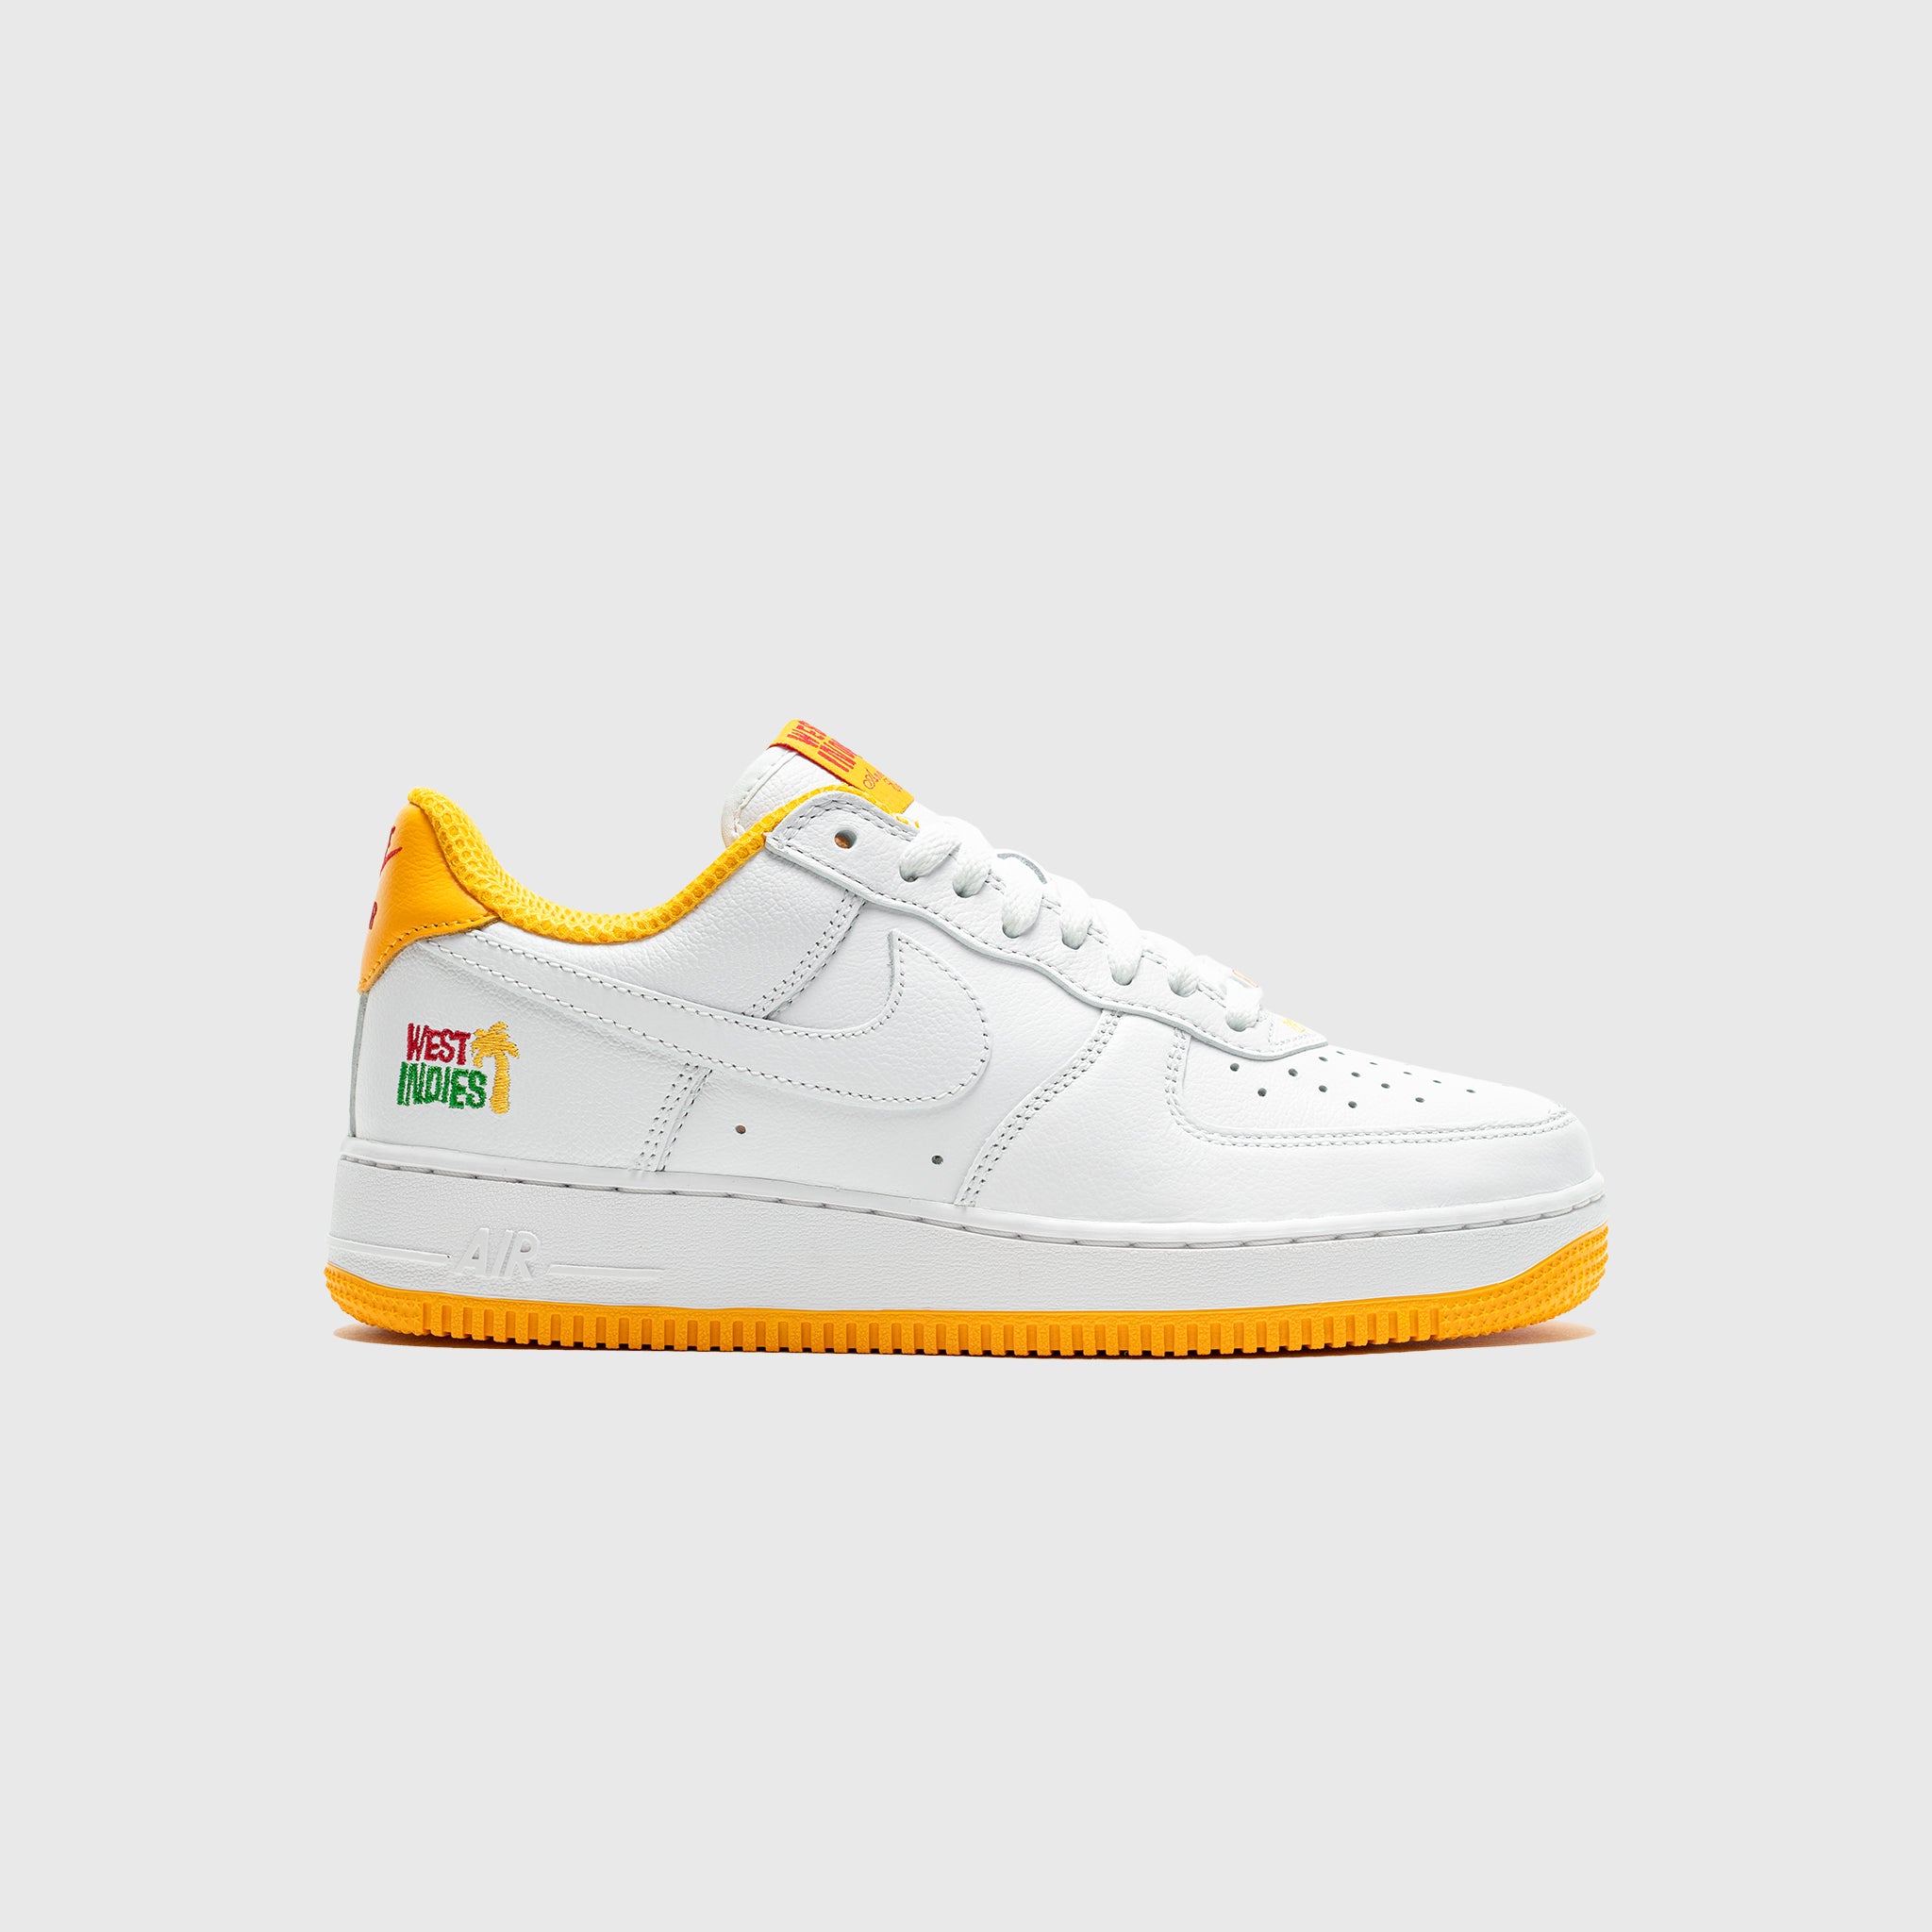 AIR FORCE 1 LOW RETRO QS "WEST INDIES YELLOW"